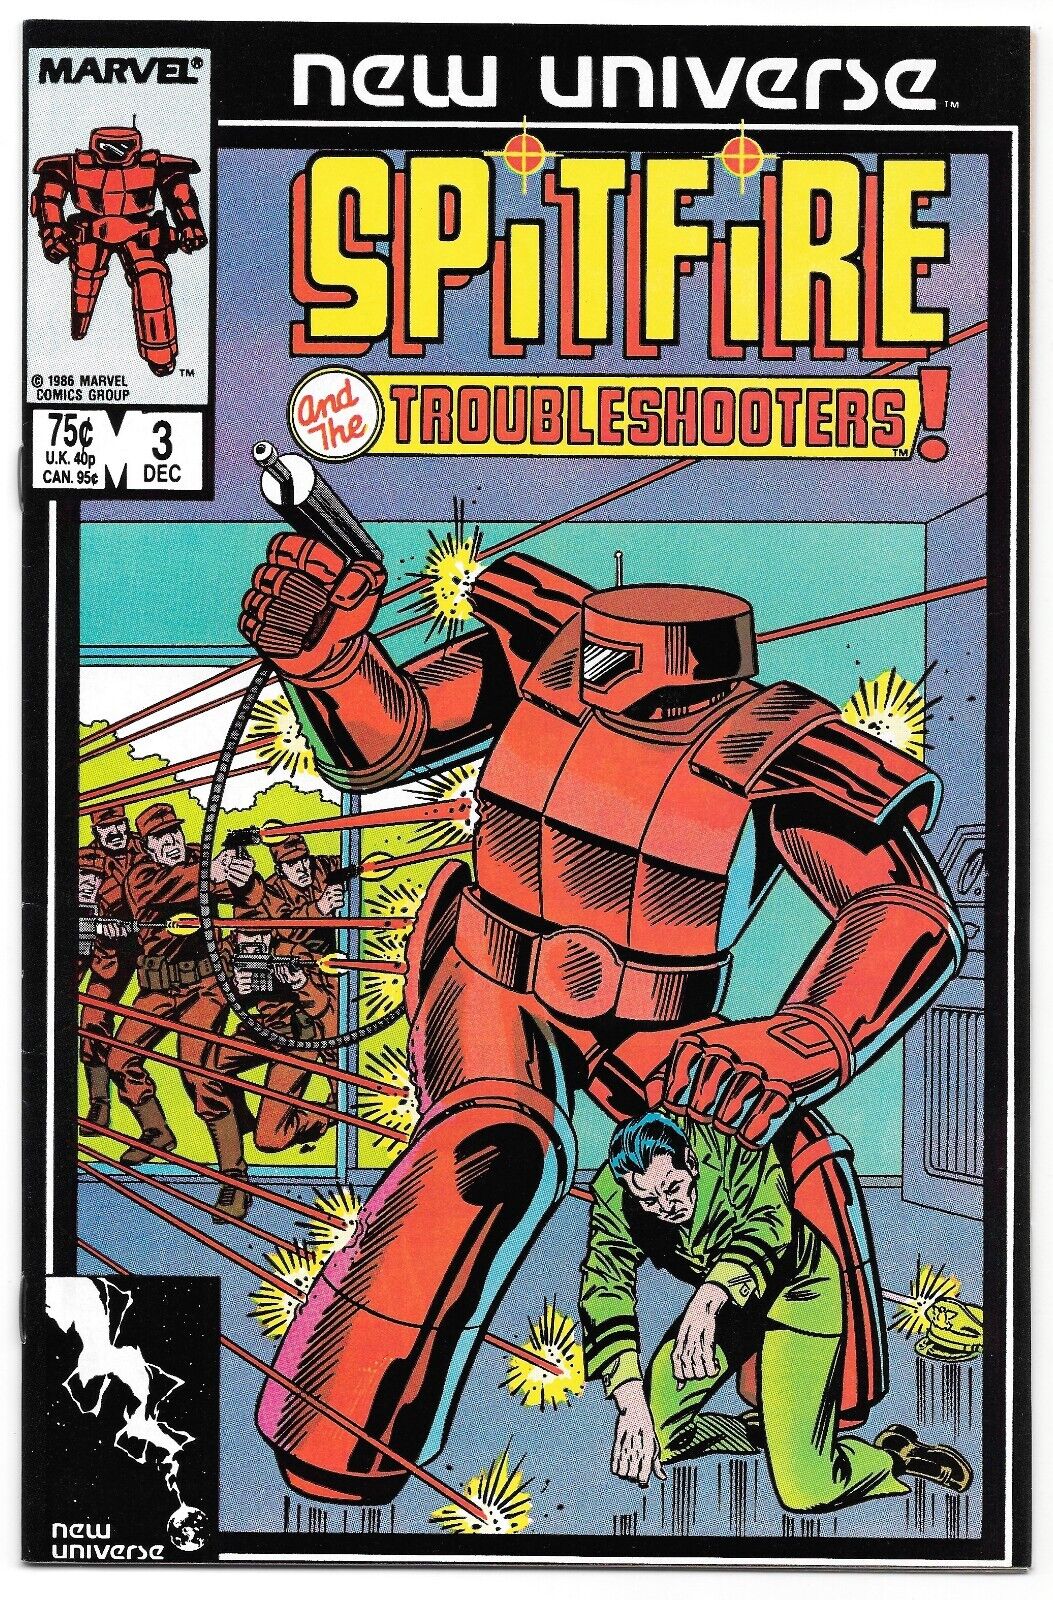 Spitfire and the Troubleshooters #3 (12/1986) Marvel New Universe